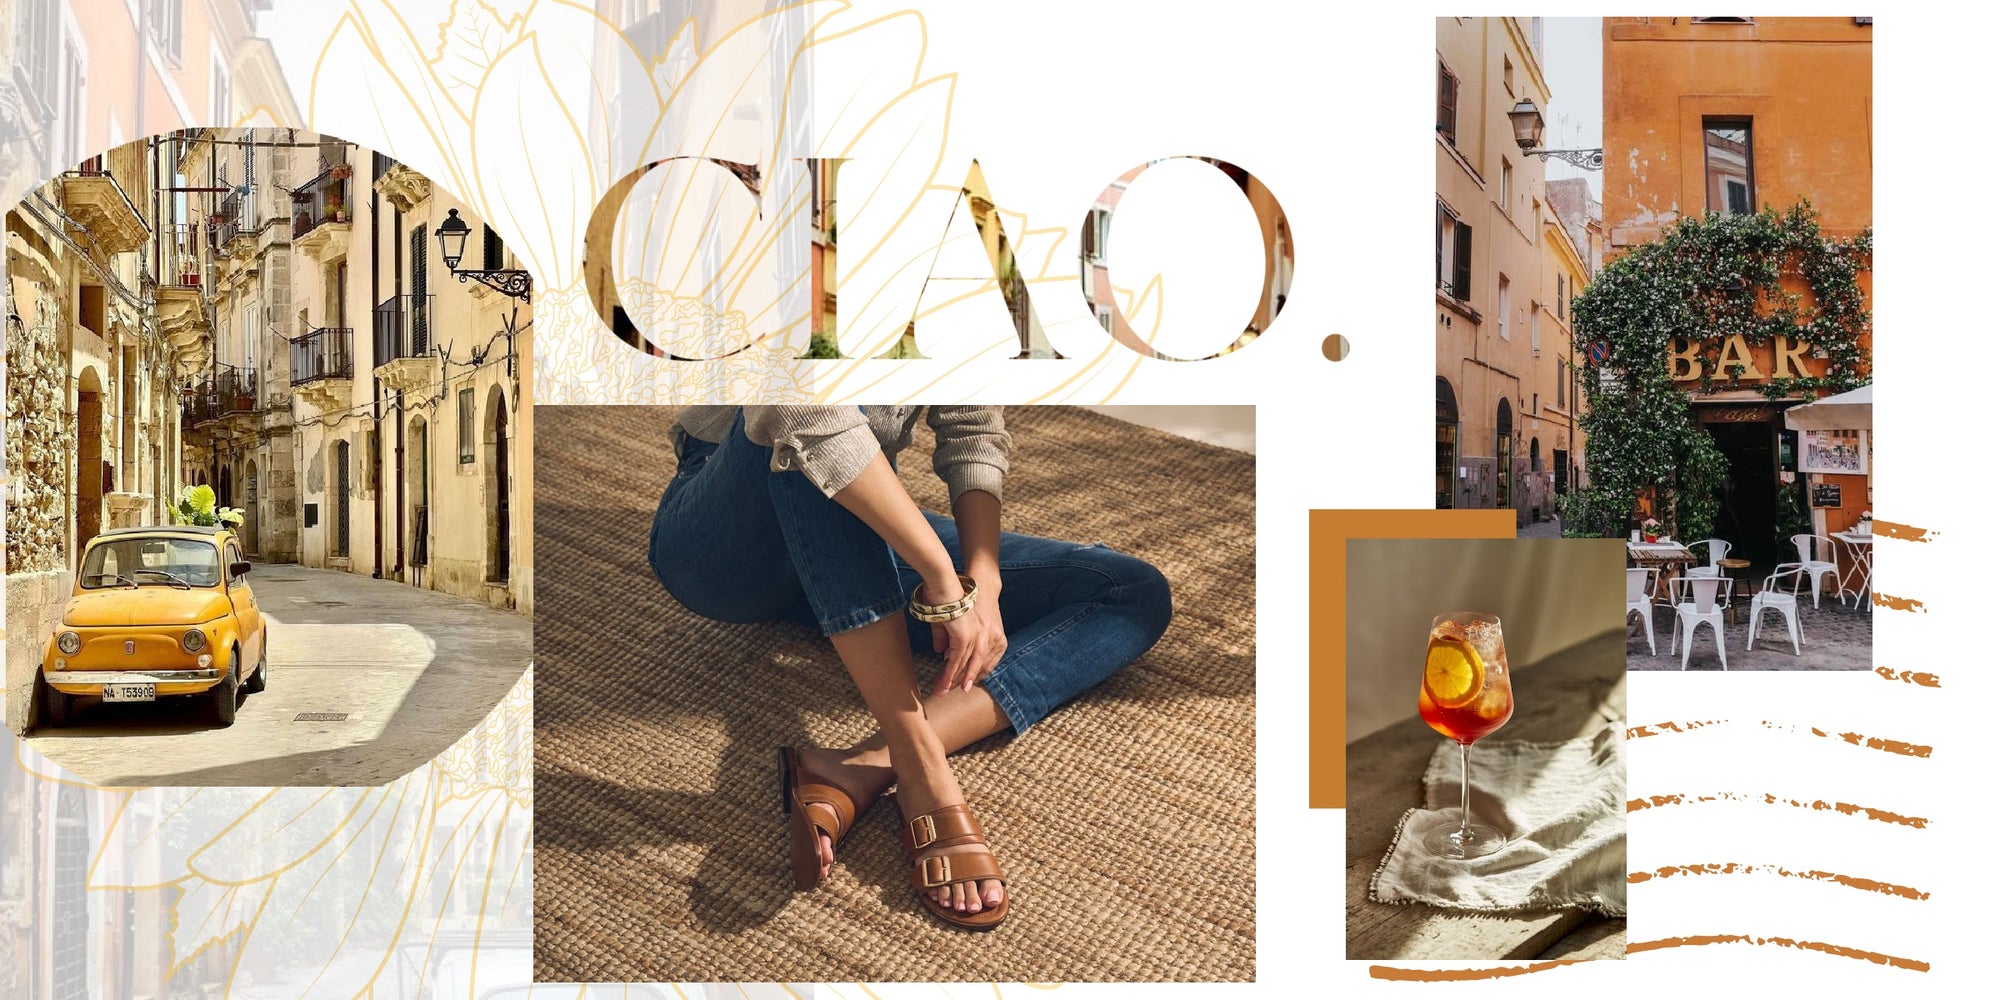 With My Sands | Leather sandals| LookBook Travel Rome | Inspirations Lifestyle | Dolce Vita